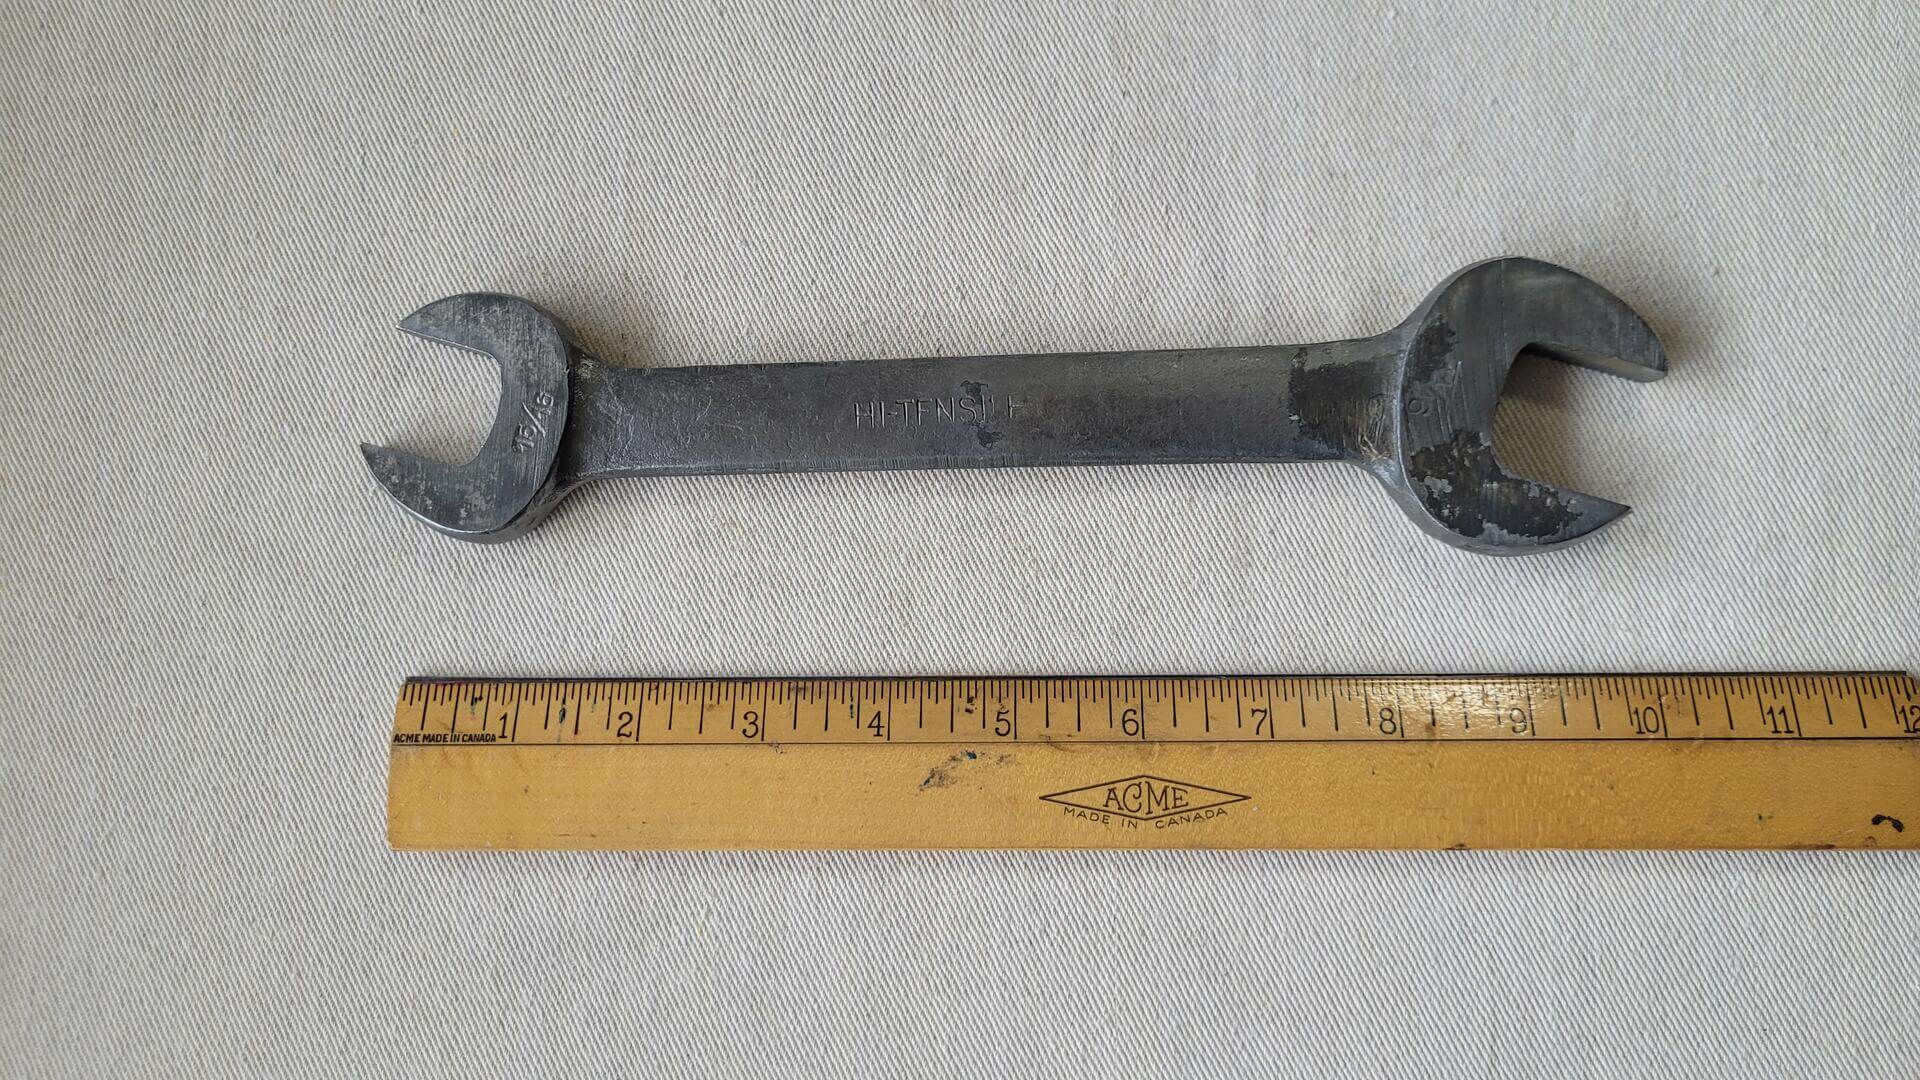 Nice vintage Armstrong Tools 15/16" x 1-1/16" open end wrench spanner model 1034-A. Antique made in USA collectible automotive mechanics hand tools